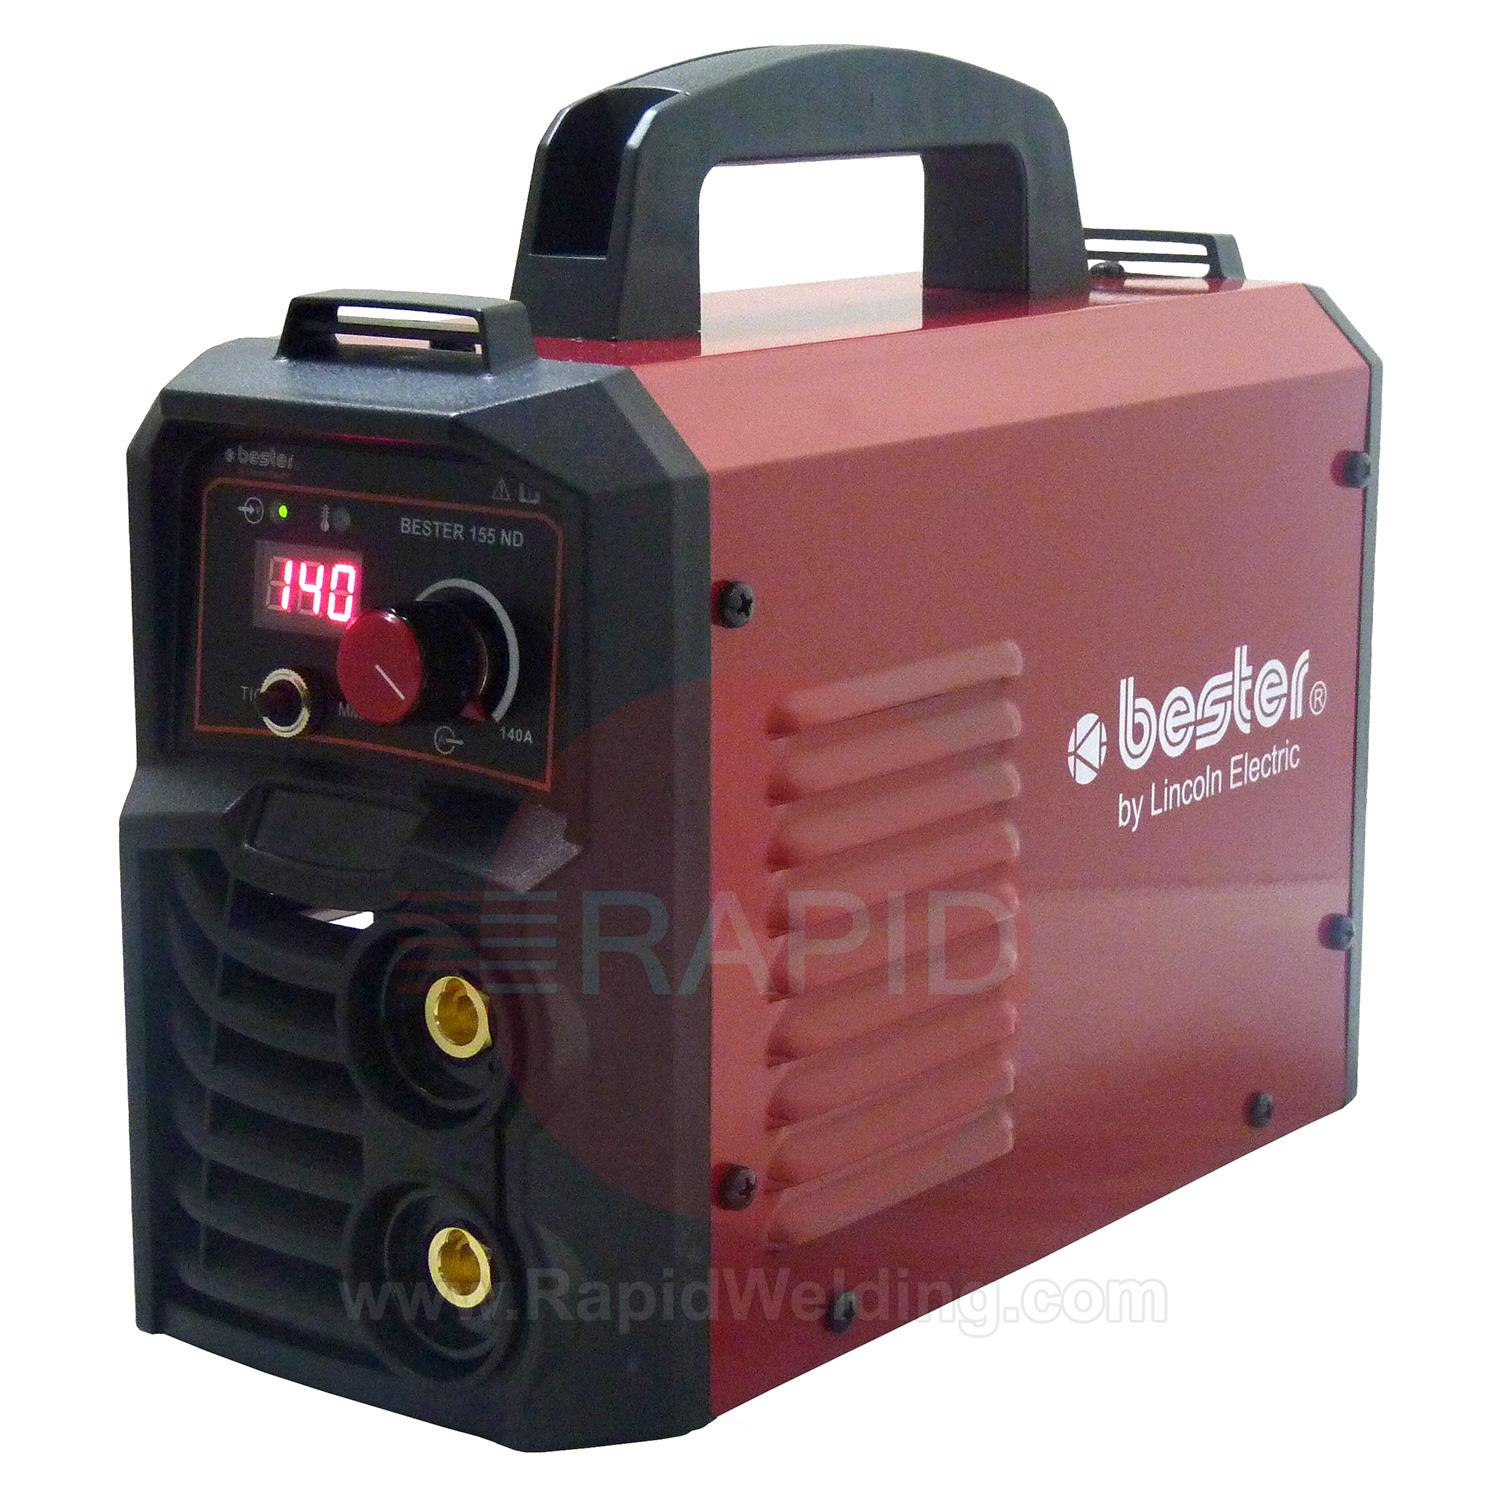 B18256-1-TP  Lincoln Bester 155-ND Inverter Arc Welder Suitcase Package w/ TIG Torch & Accessory Kit - 230v, 1ph